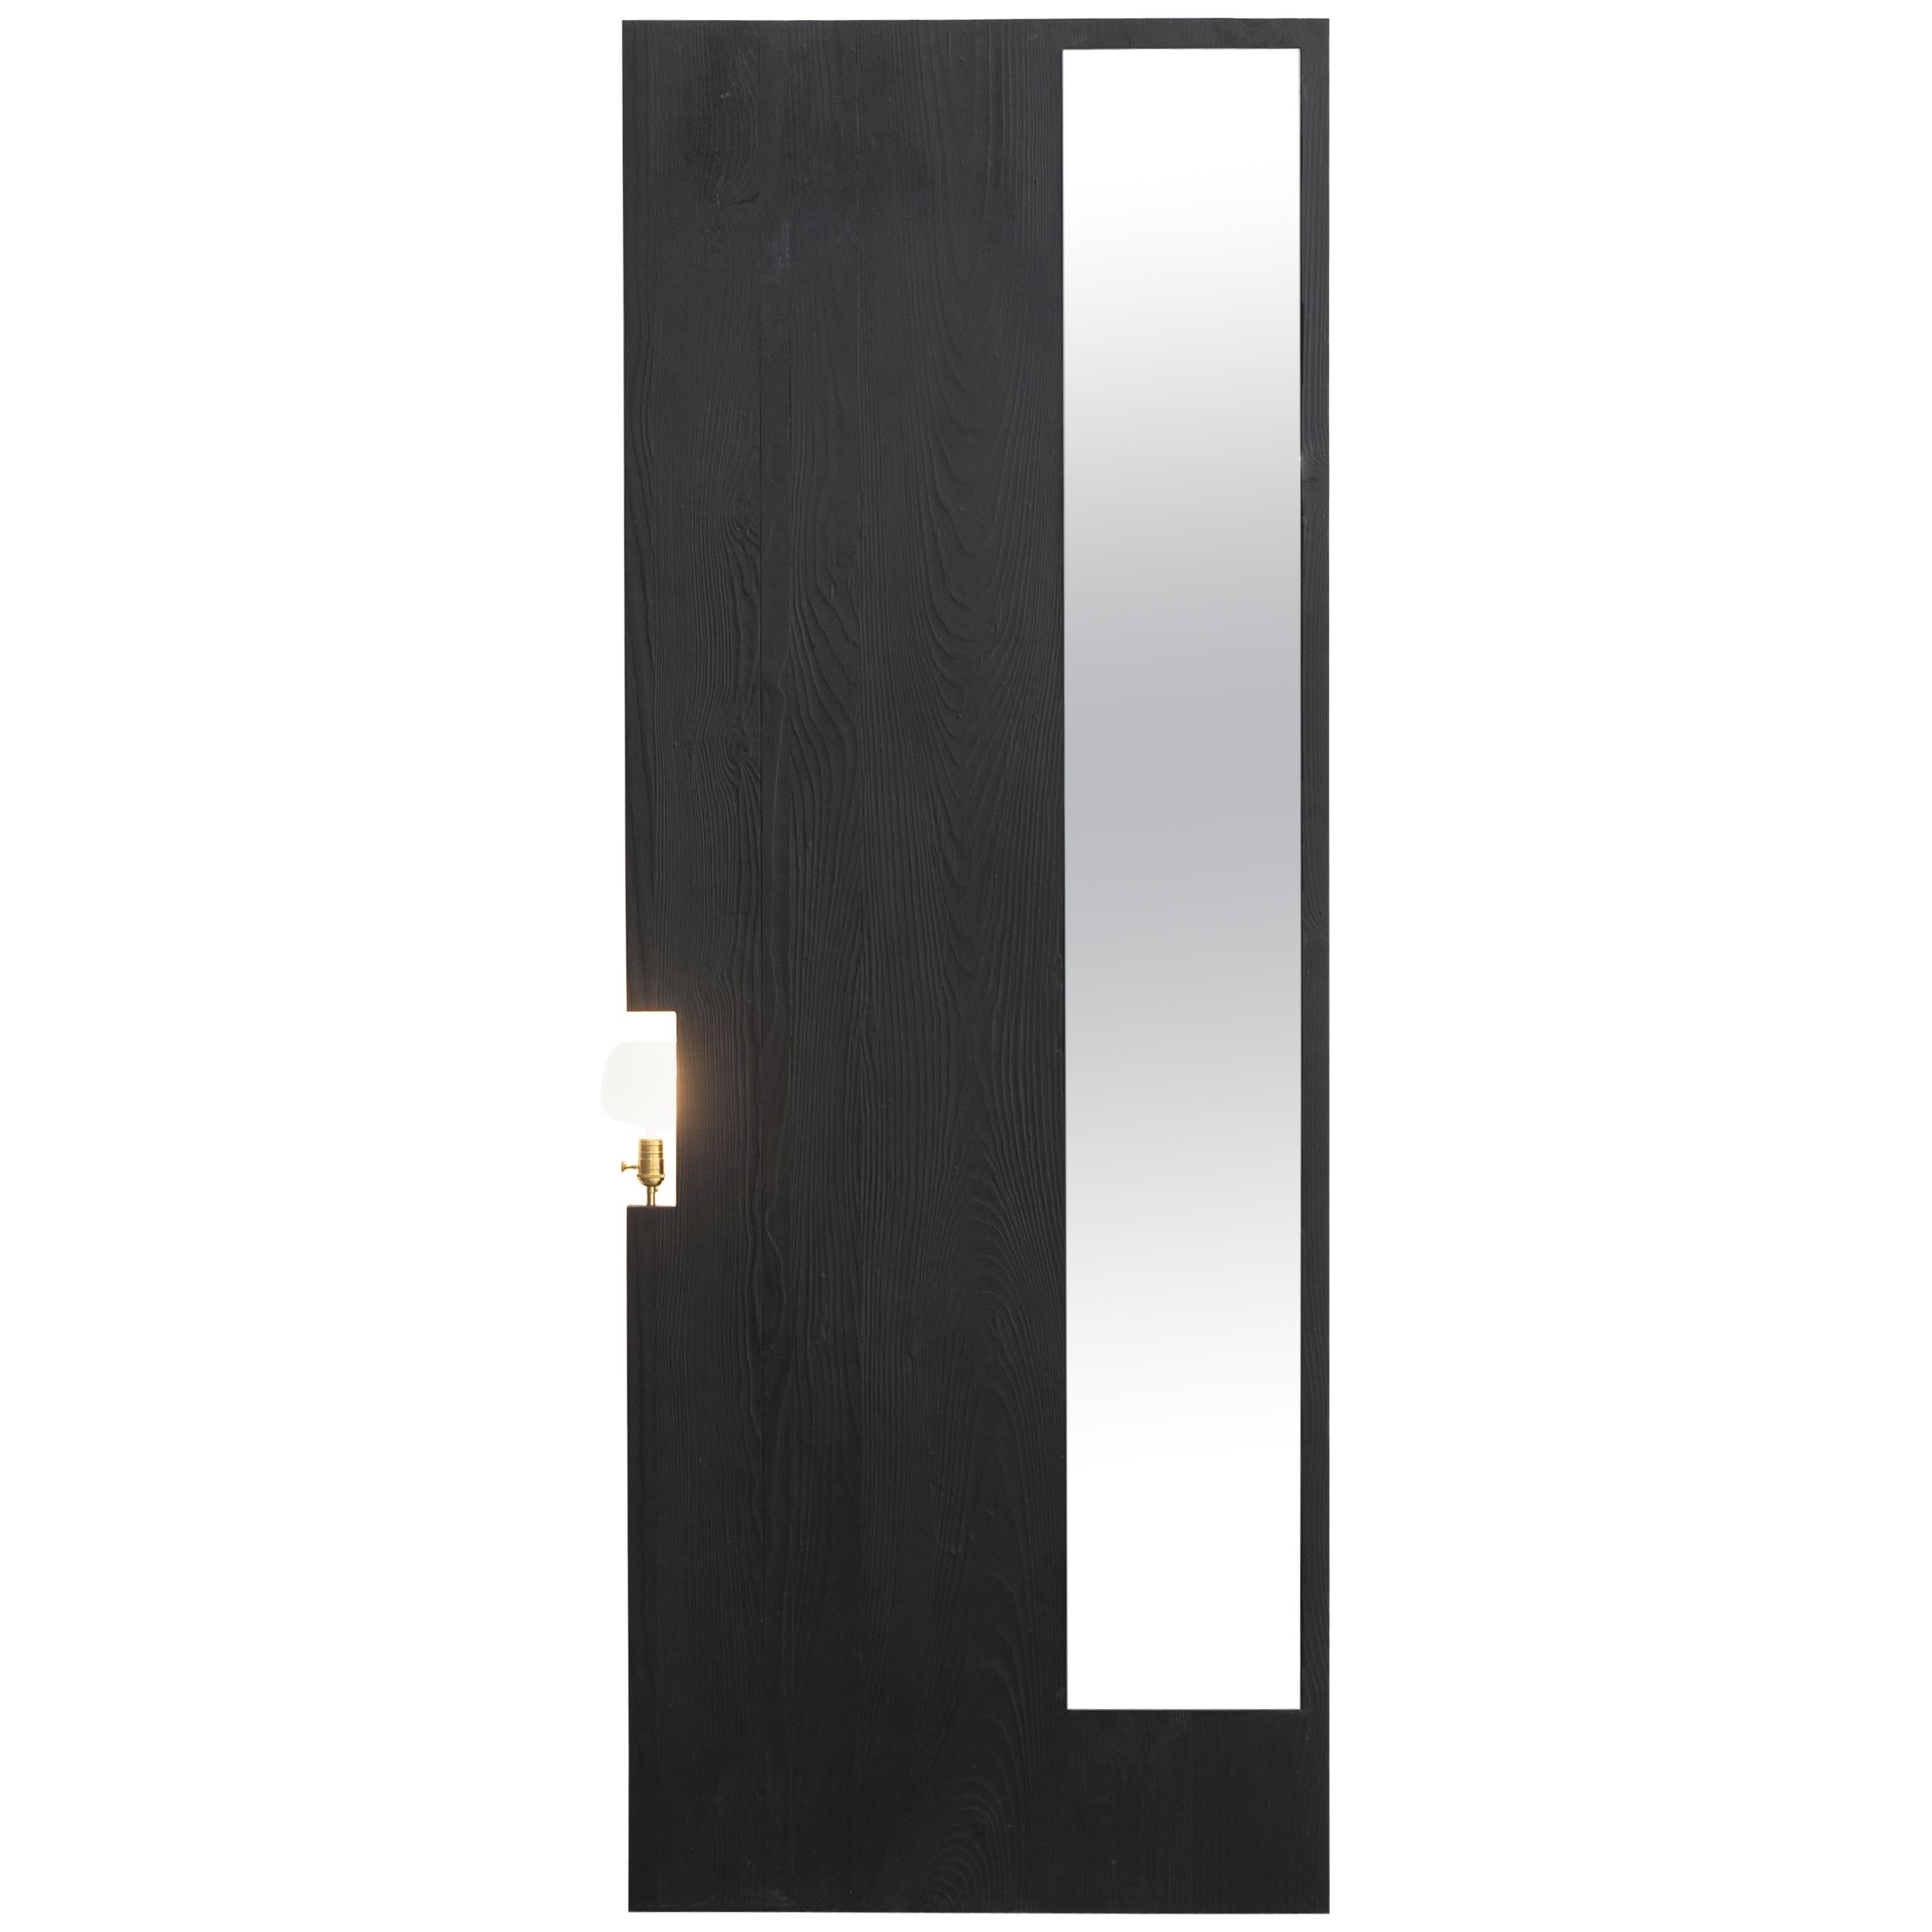 Char Mirror by Bailey Fontaine, Represented by Tuleste Factory